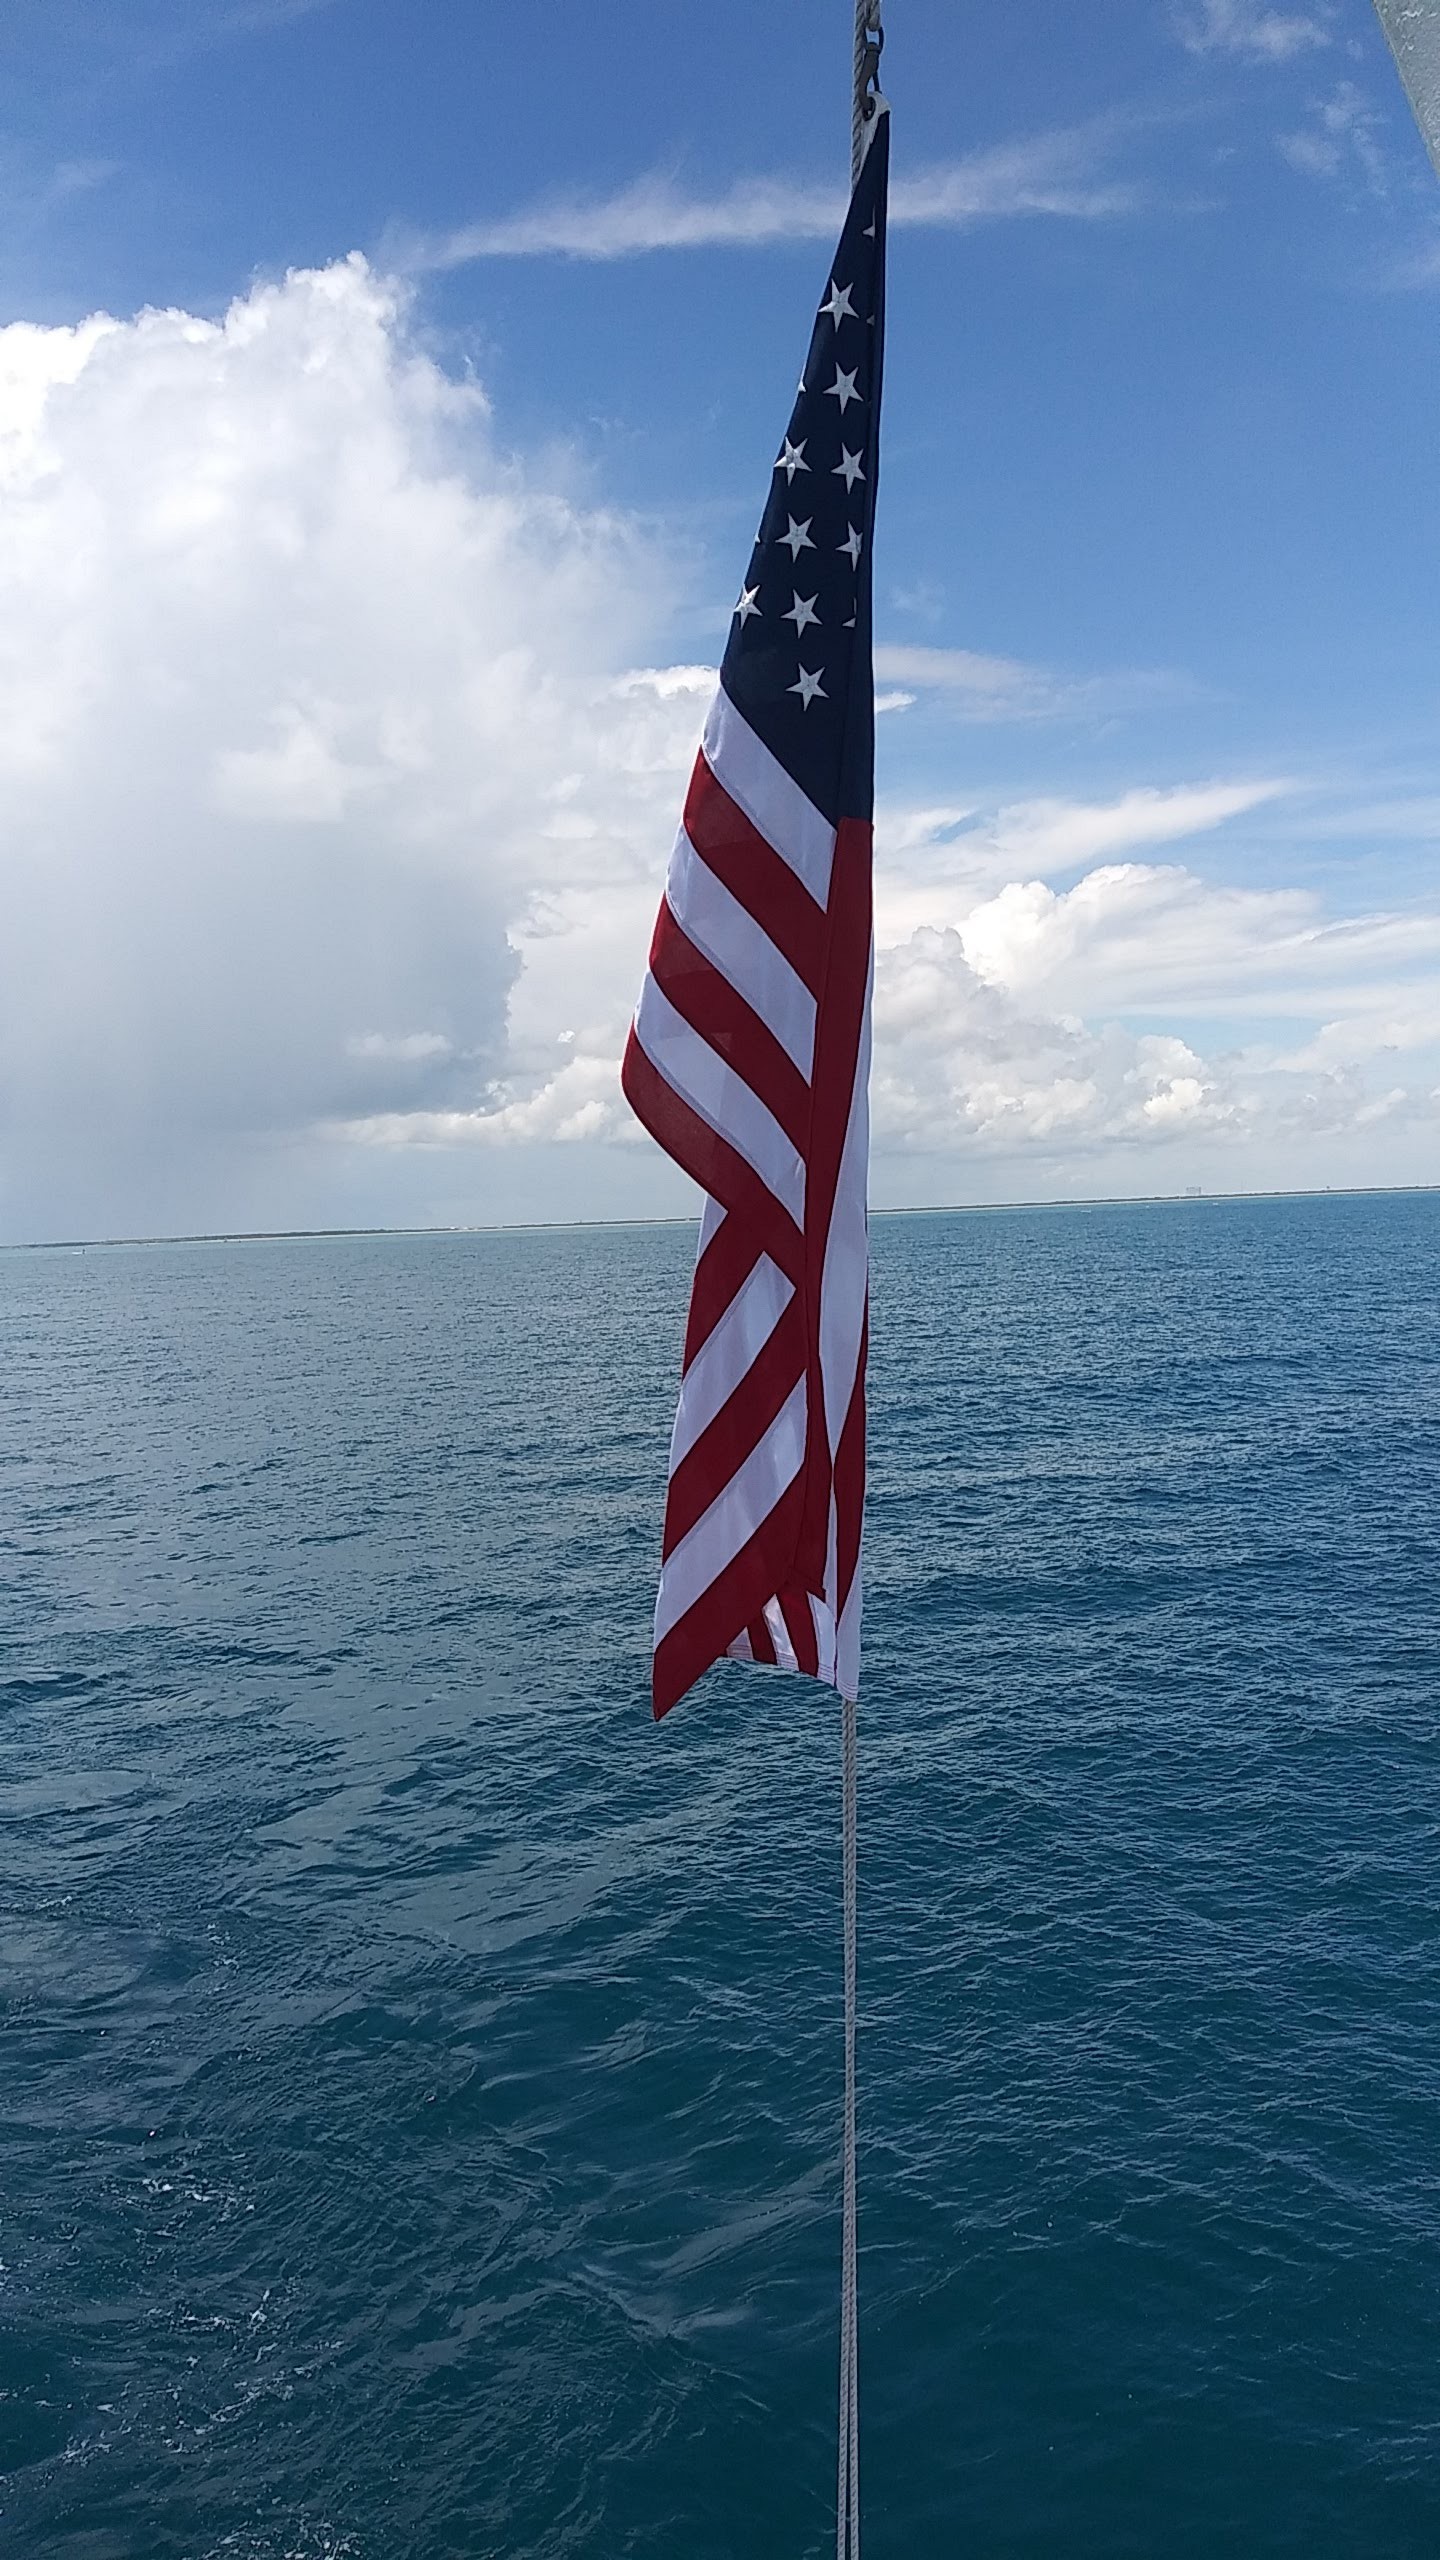 United States Flag on a boat 3